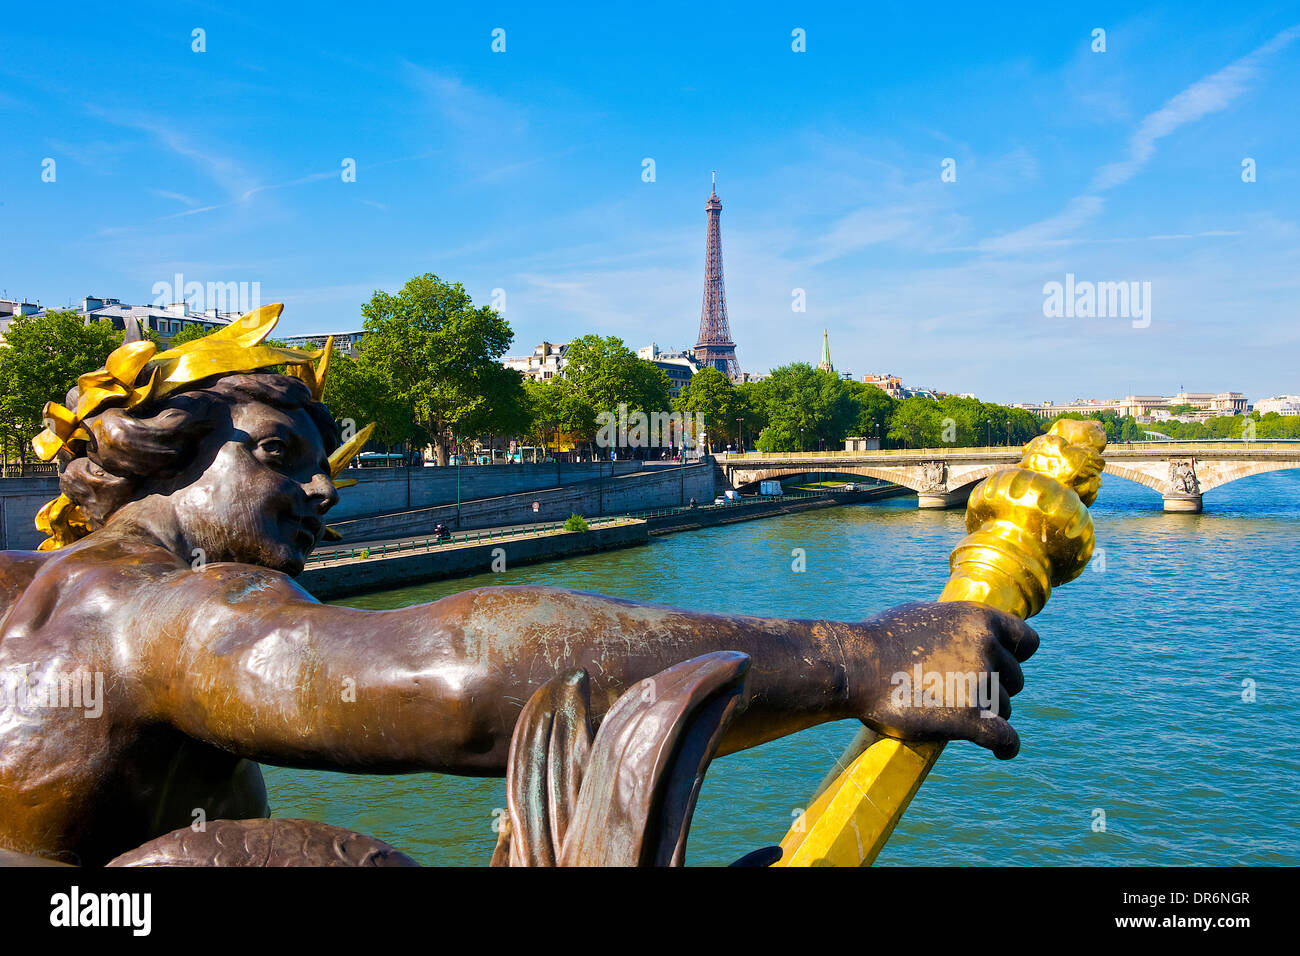 Eiffel tower and Seine river in Paris, France Stock Photo